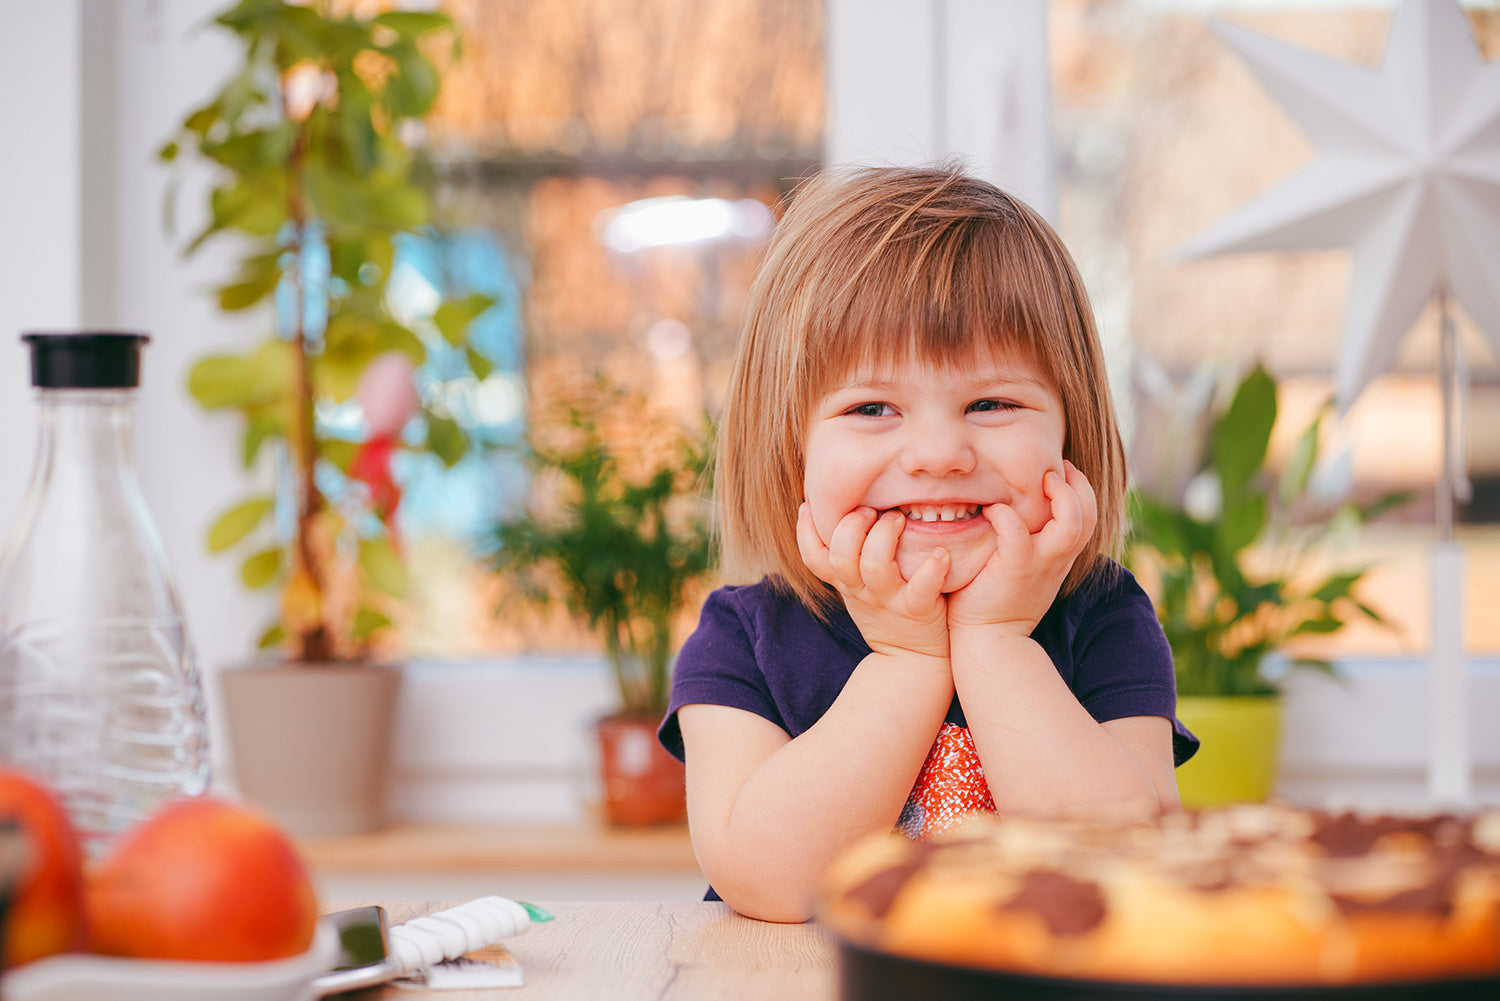 Child smiling at food on the counter